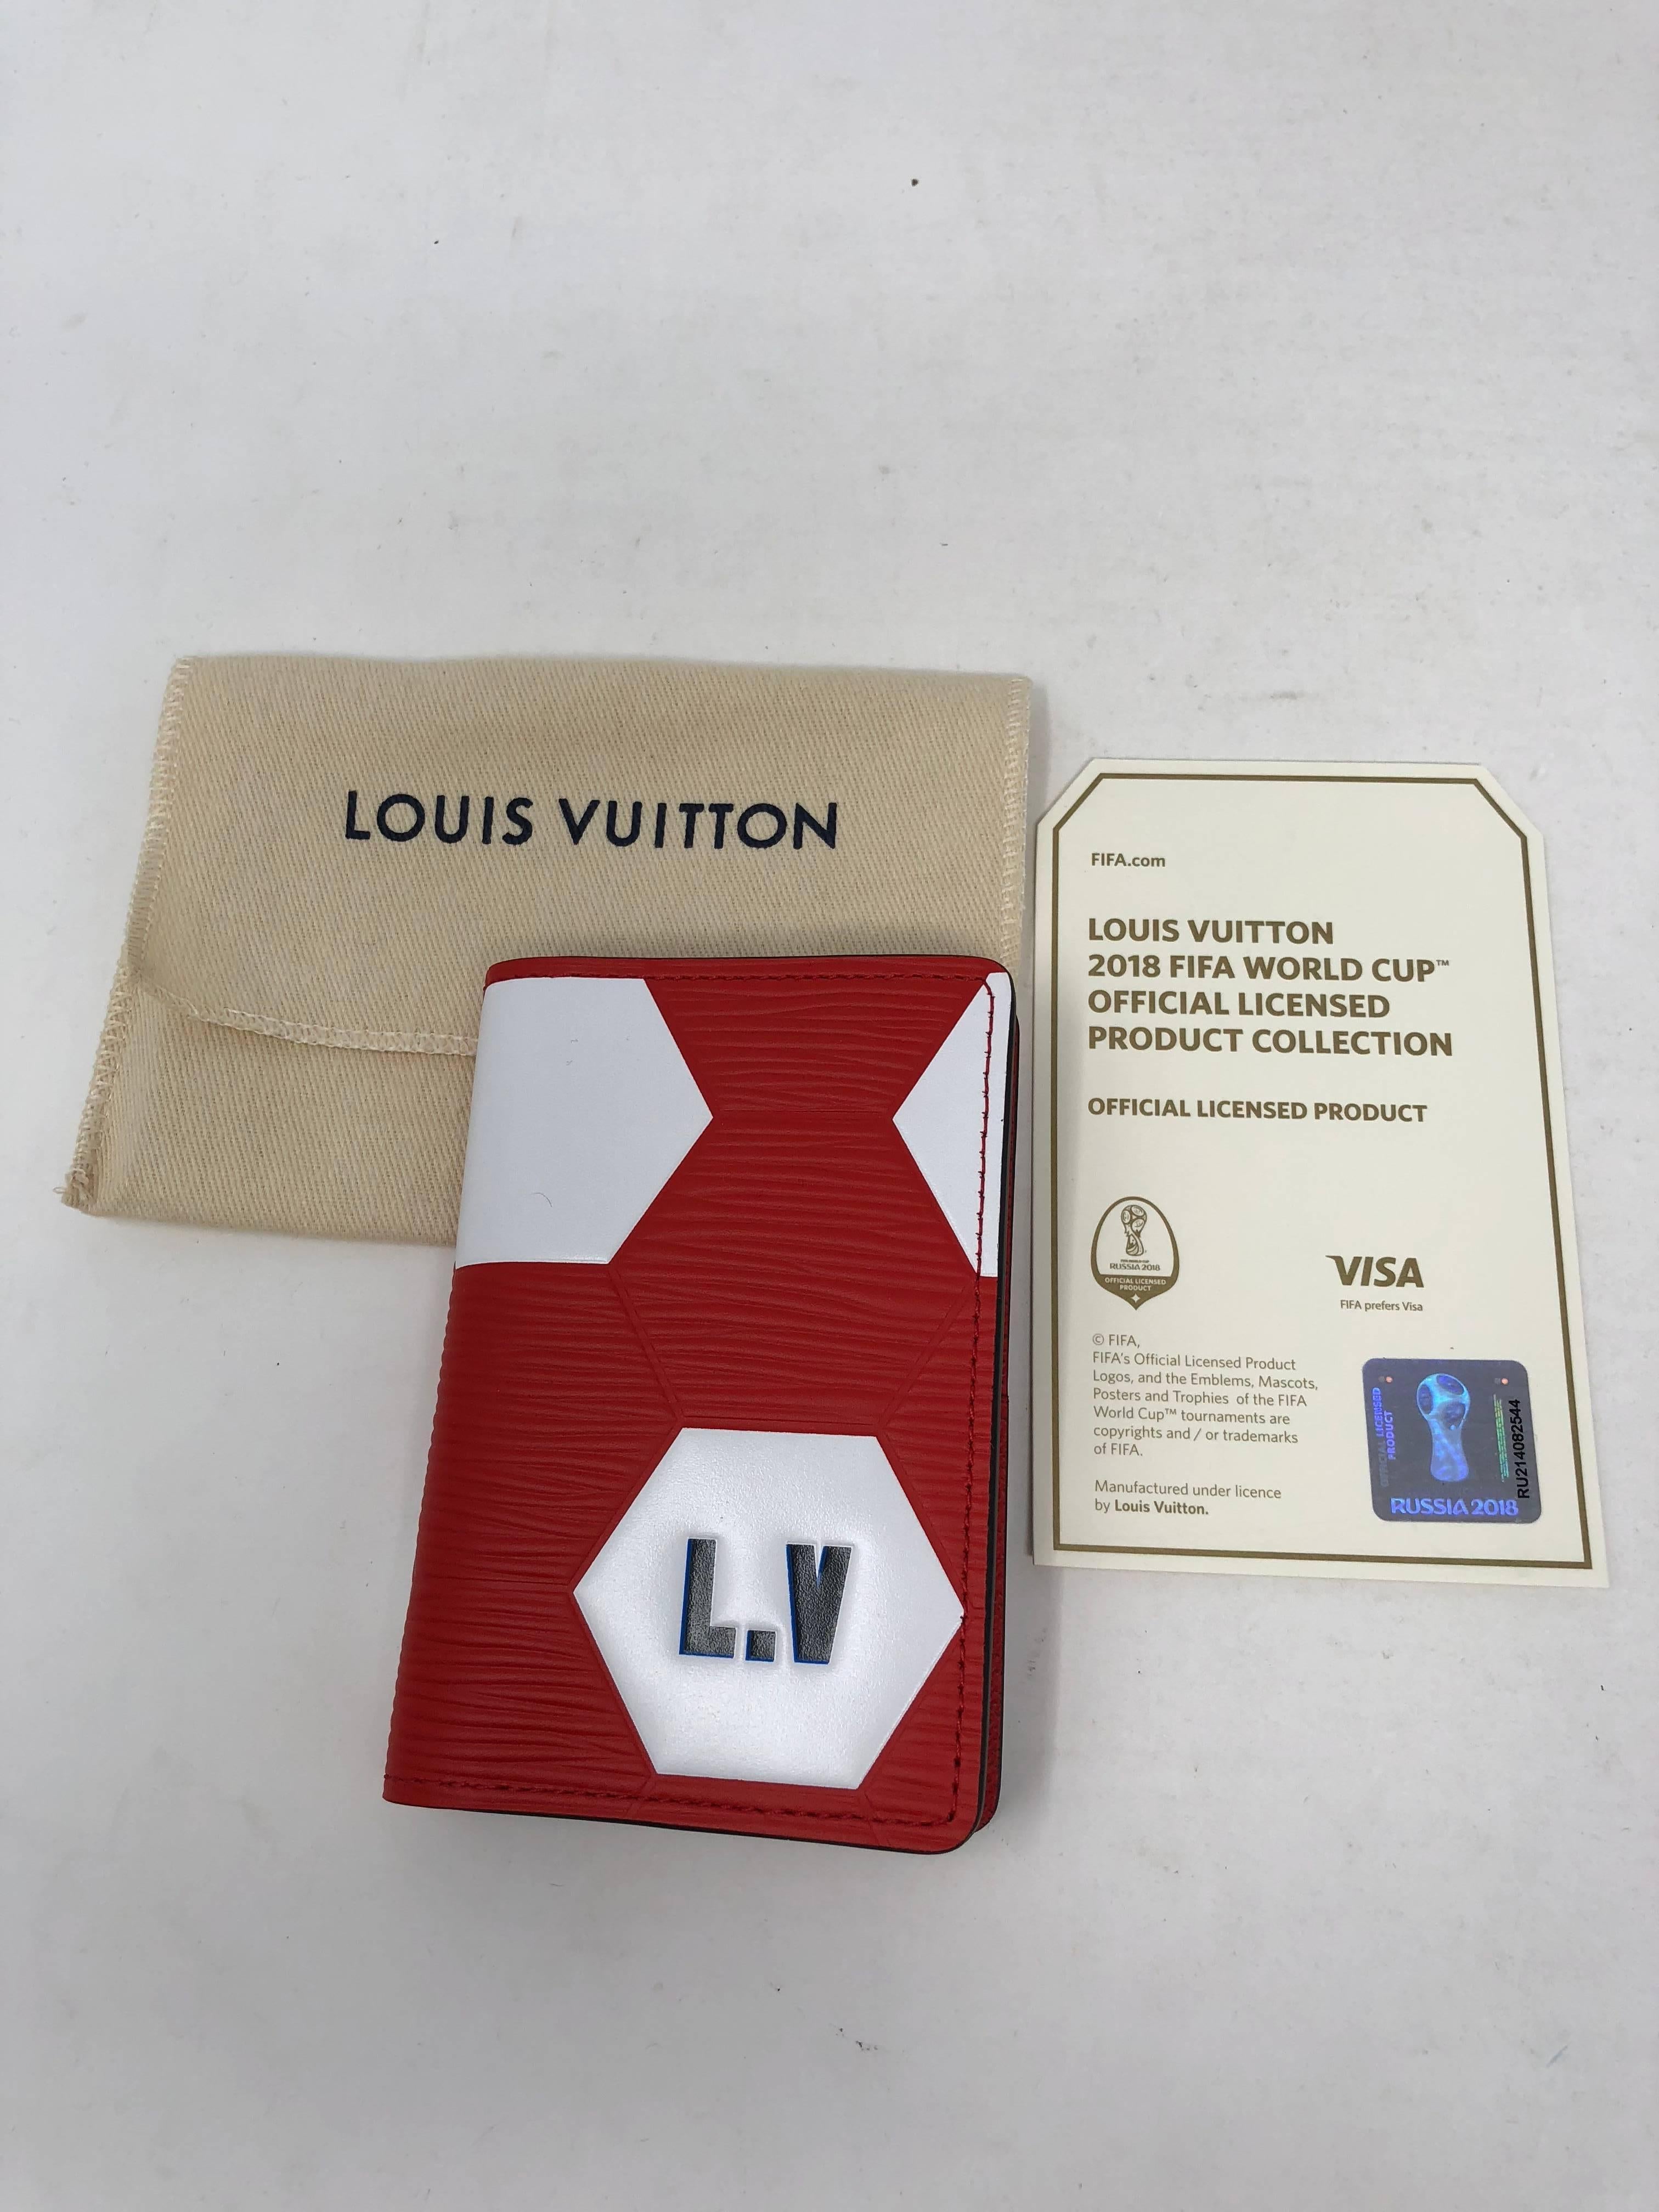 Louis Vuitton Red Pocket Organizer from FIFA World Cup Collection 2018. This collaboration created a soccer ball effect to celebrate the WorldCup. Pocket organizer in red and white is sold out and limited. Brand new and comes with dust cover and